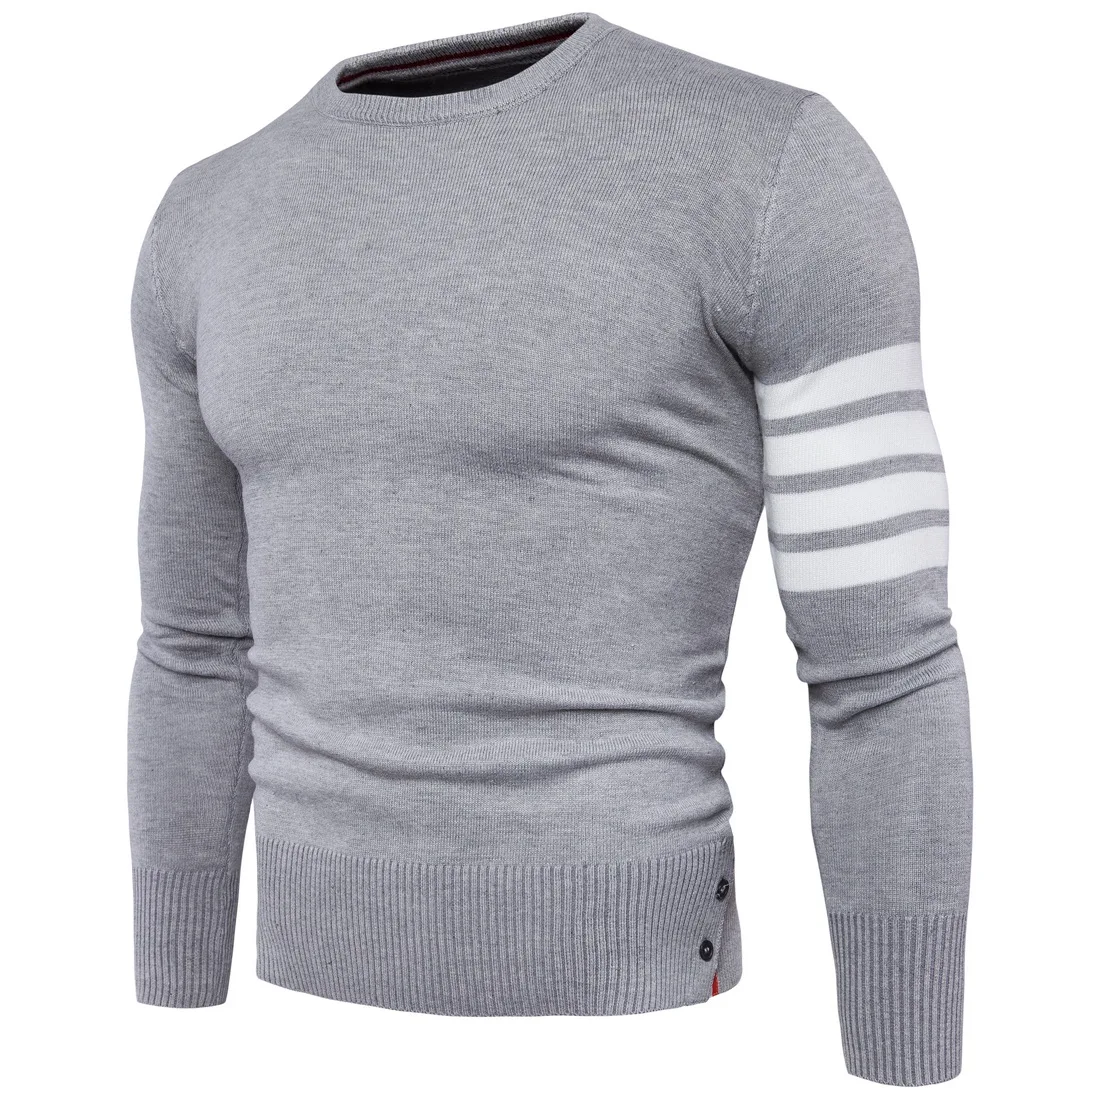 Sweater Pullover Men 2018 Male Brand Casual Slim Sweaters High Quaility Cuffs Fight Color Hedging O-Neck Men'S | Мужская одежда